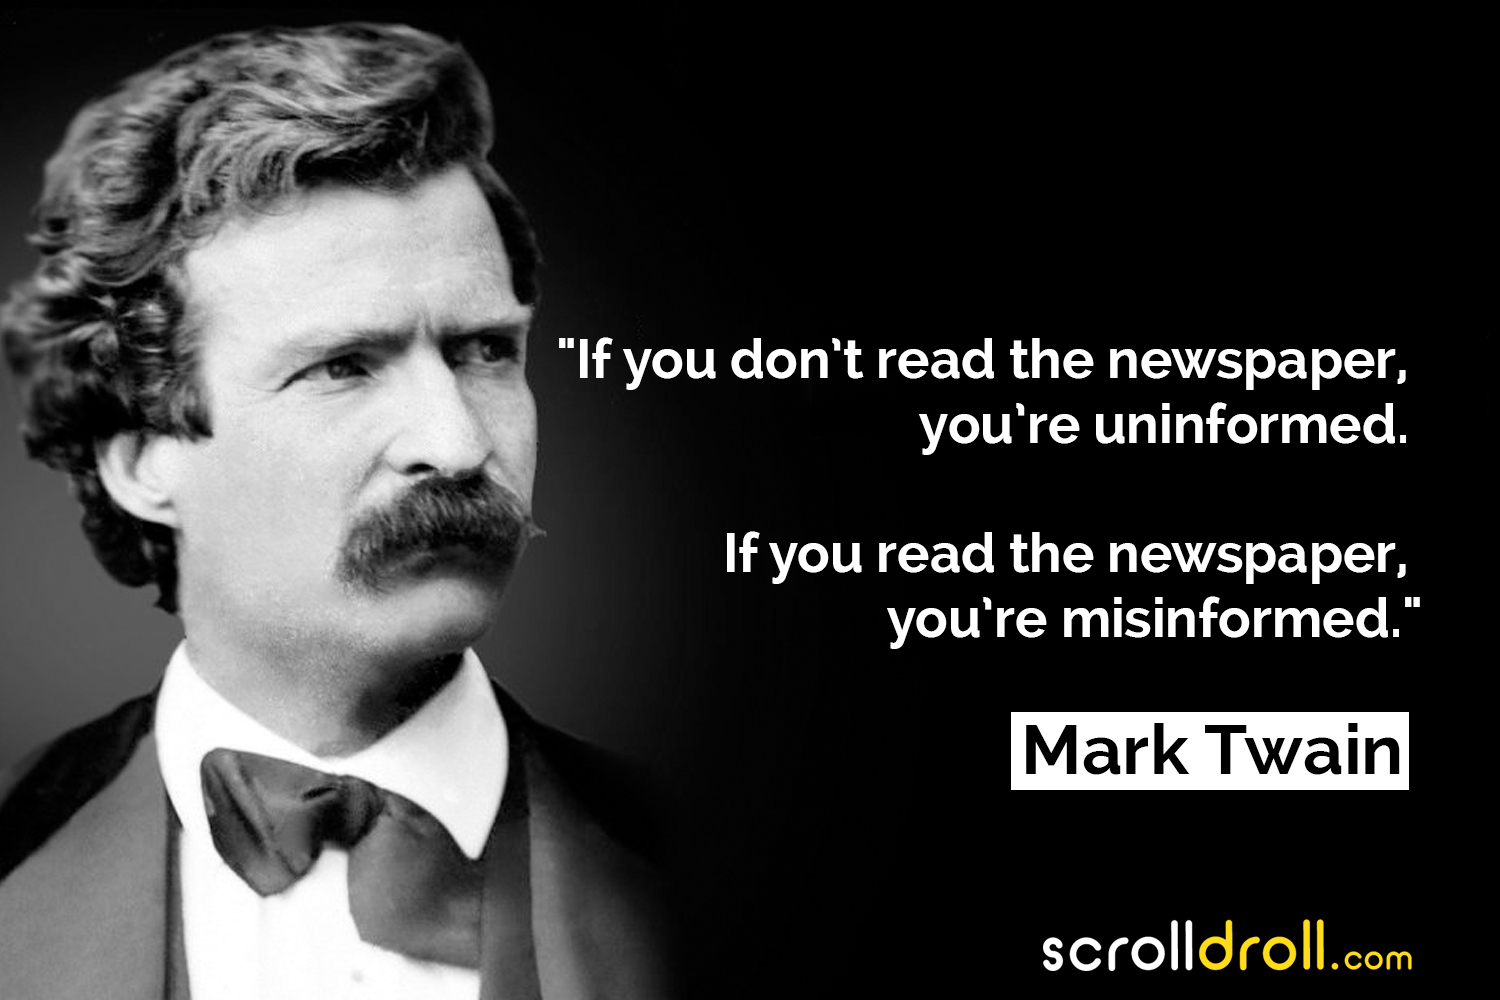 20 Best Mark Twain Quotes Full Of Wit, Inspiration, Humor & Life